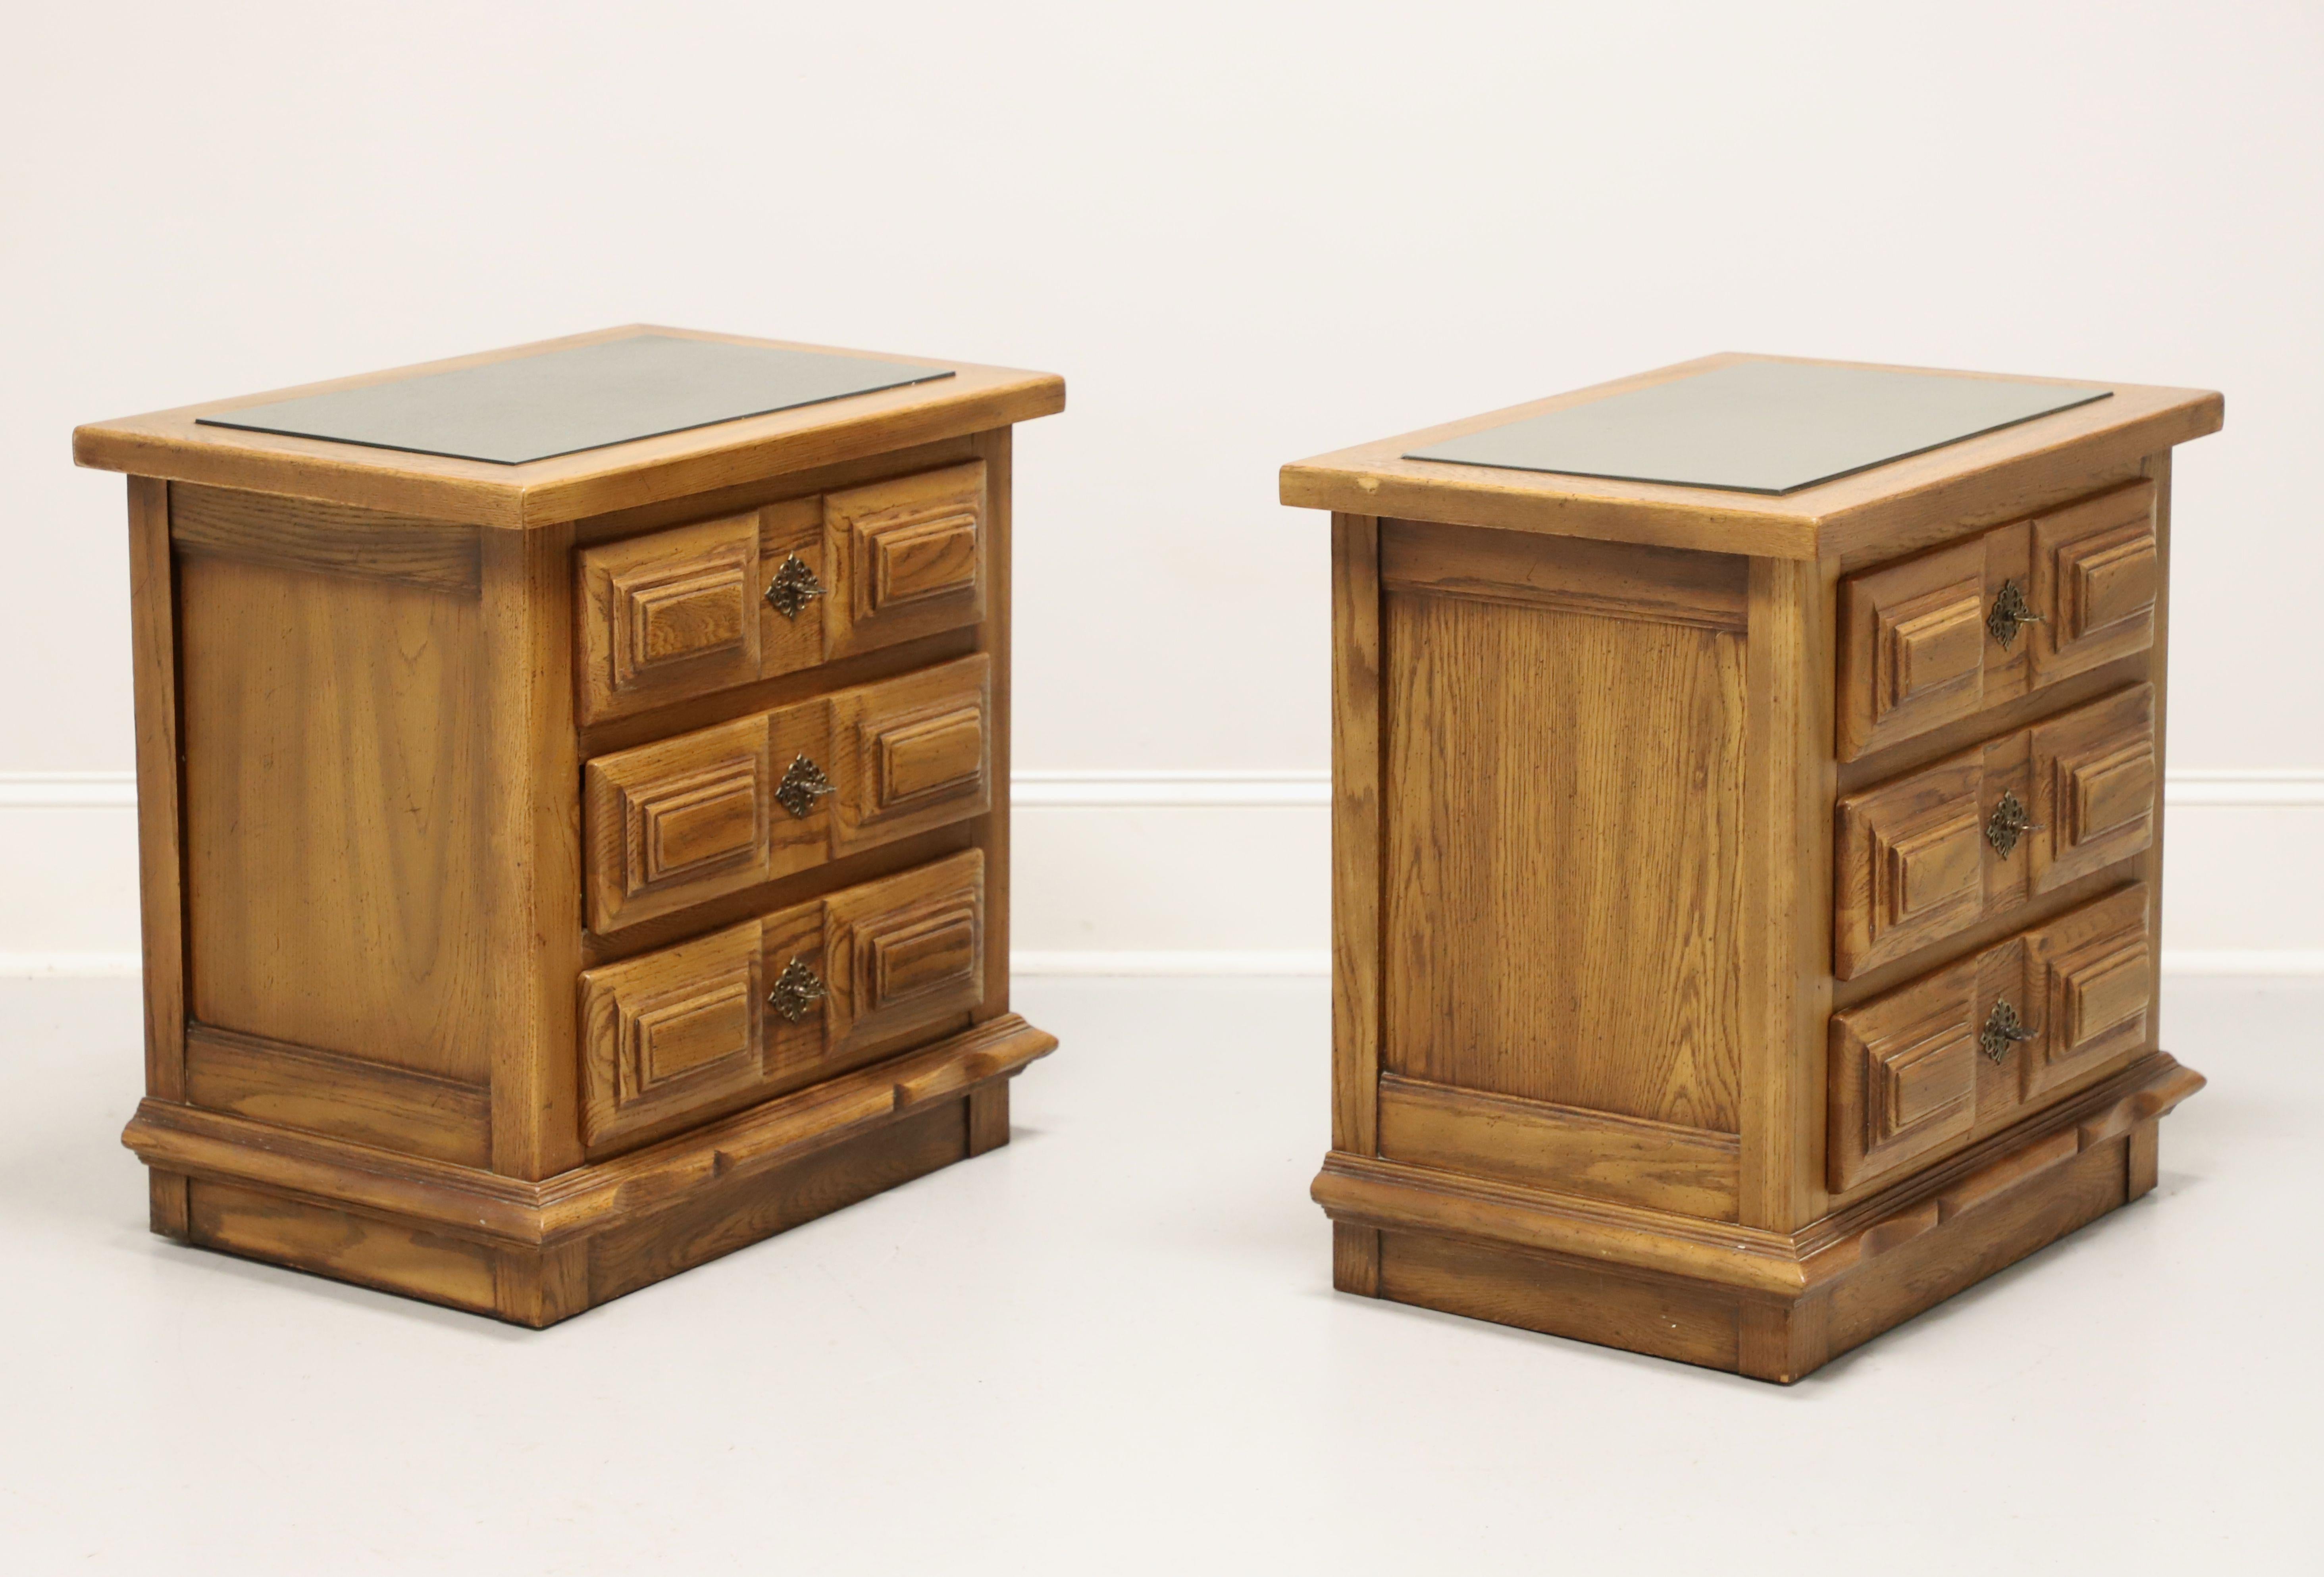 A pair of Spanish Colonial style nightstands by Link-Taylor, from their Espanol Collection. Solid oak with a lighter color slightly distressed finish, inset slate to the square edge top, brass hardware, raised & carved drawer fronts, and a